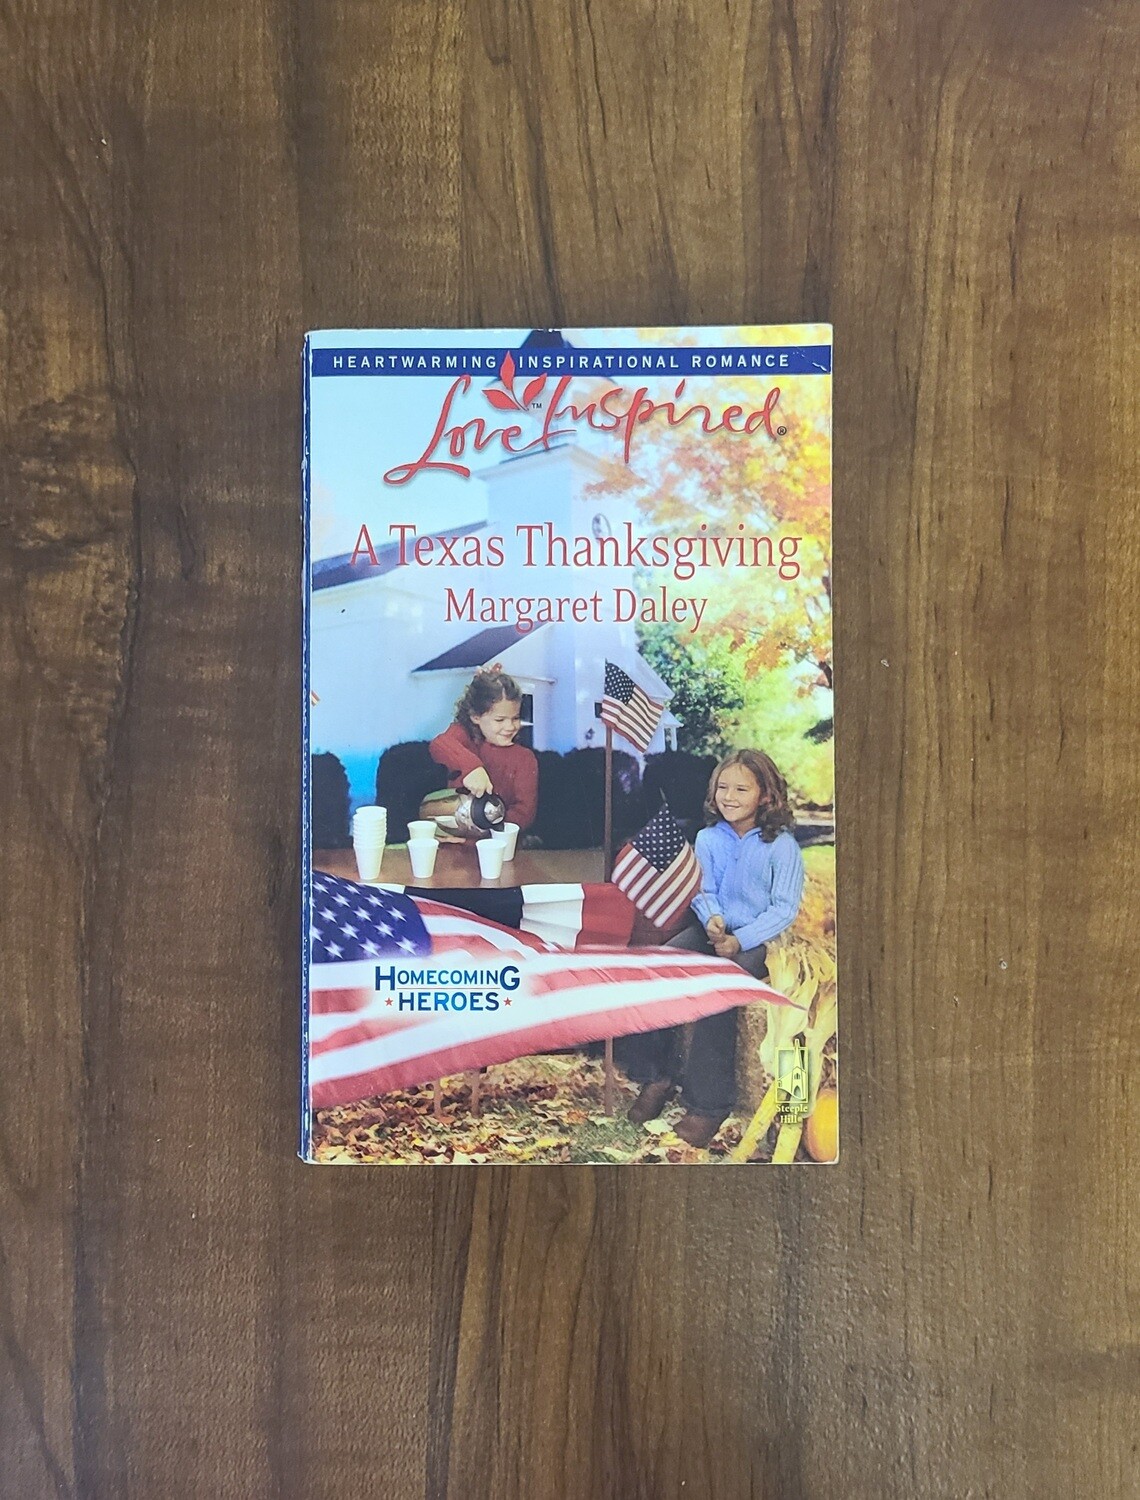 A Texas Thanksgiving by Margaret Daley